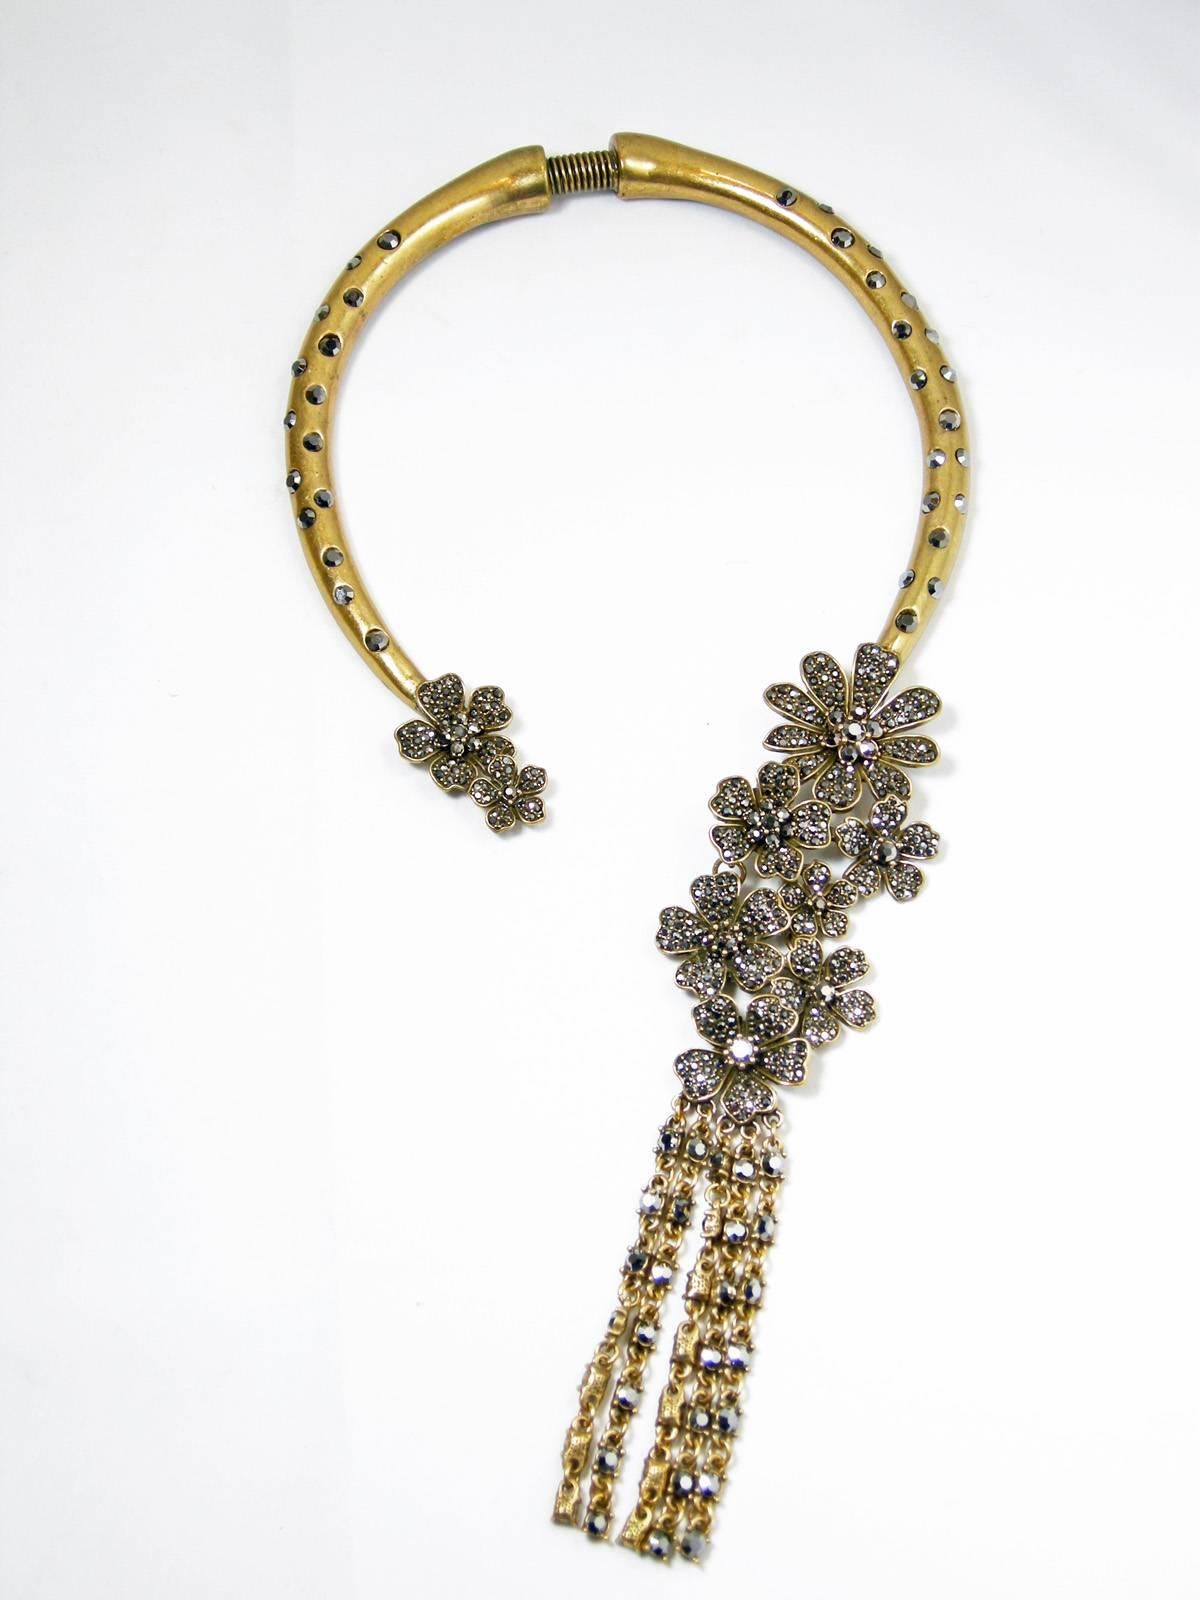 This is over the top Gorgeous! This Oscar De La Renta attributed to be his  clear Crystal Statement Necklace with Fringe. It has a spring mechanism so one size fits all fit. It has an antique gold tone metal with brilliant white sparkling crystal